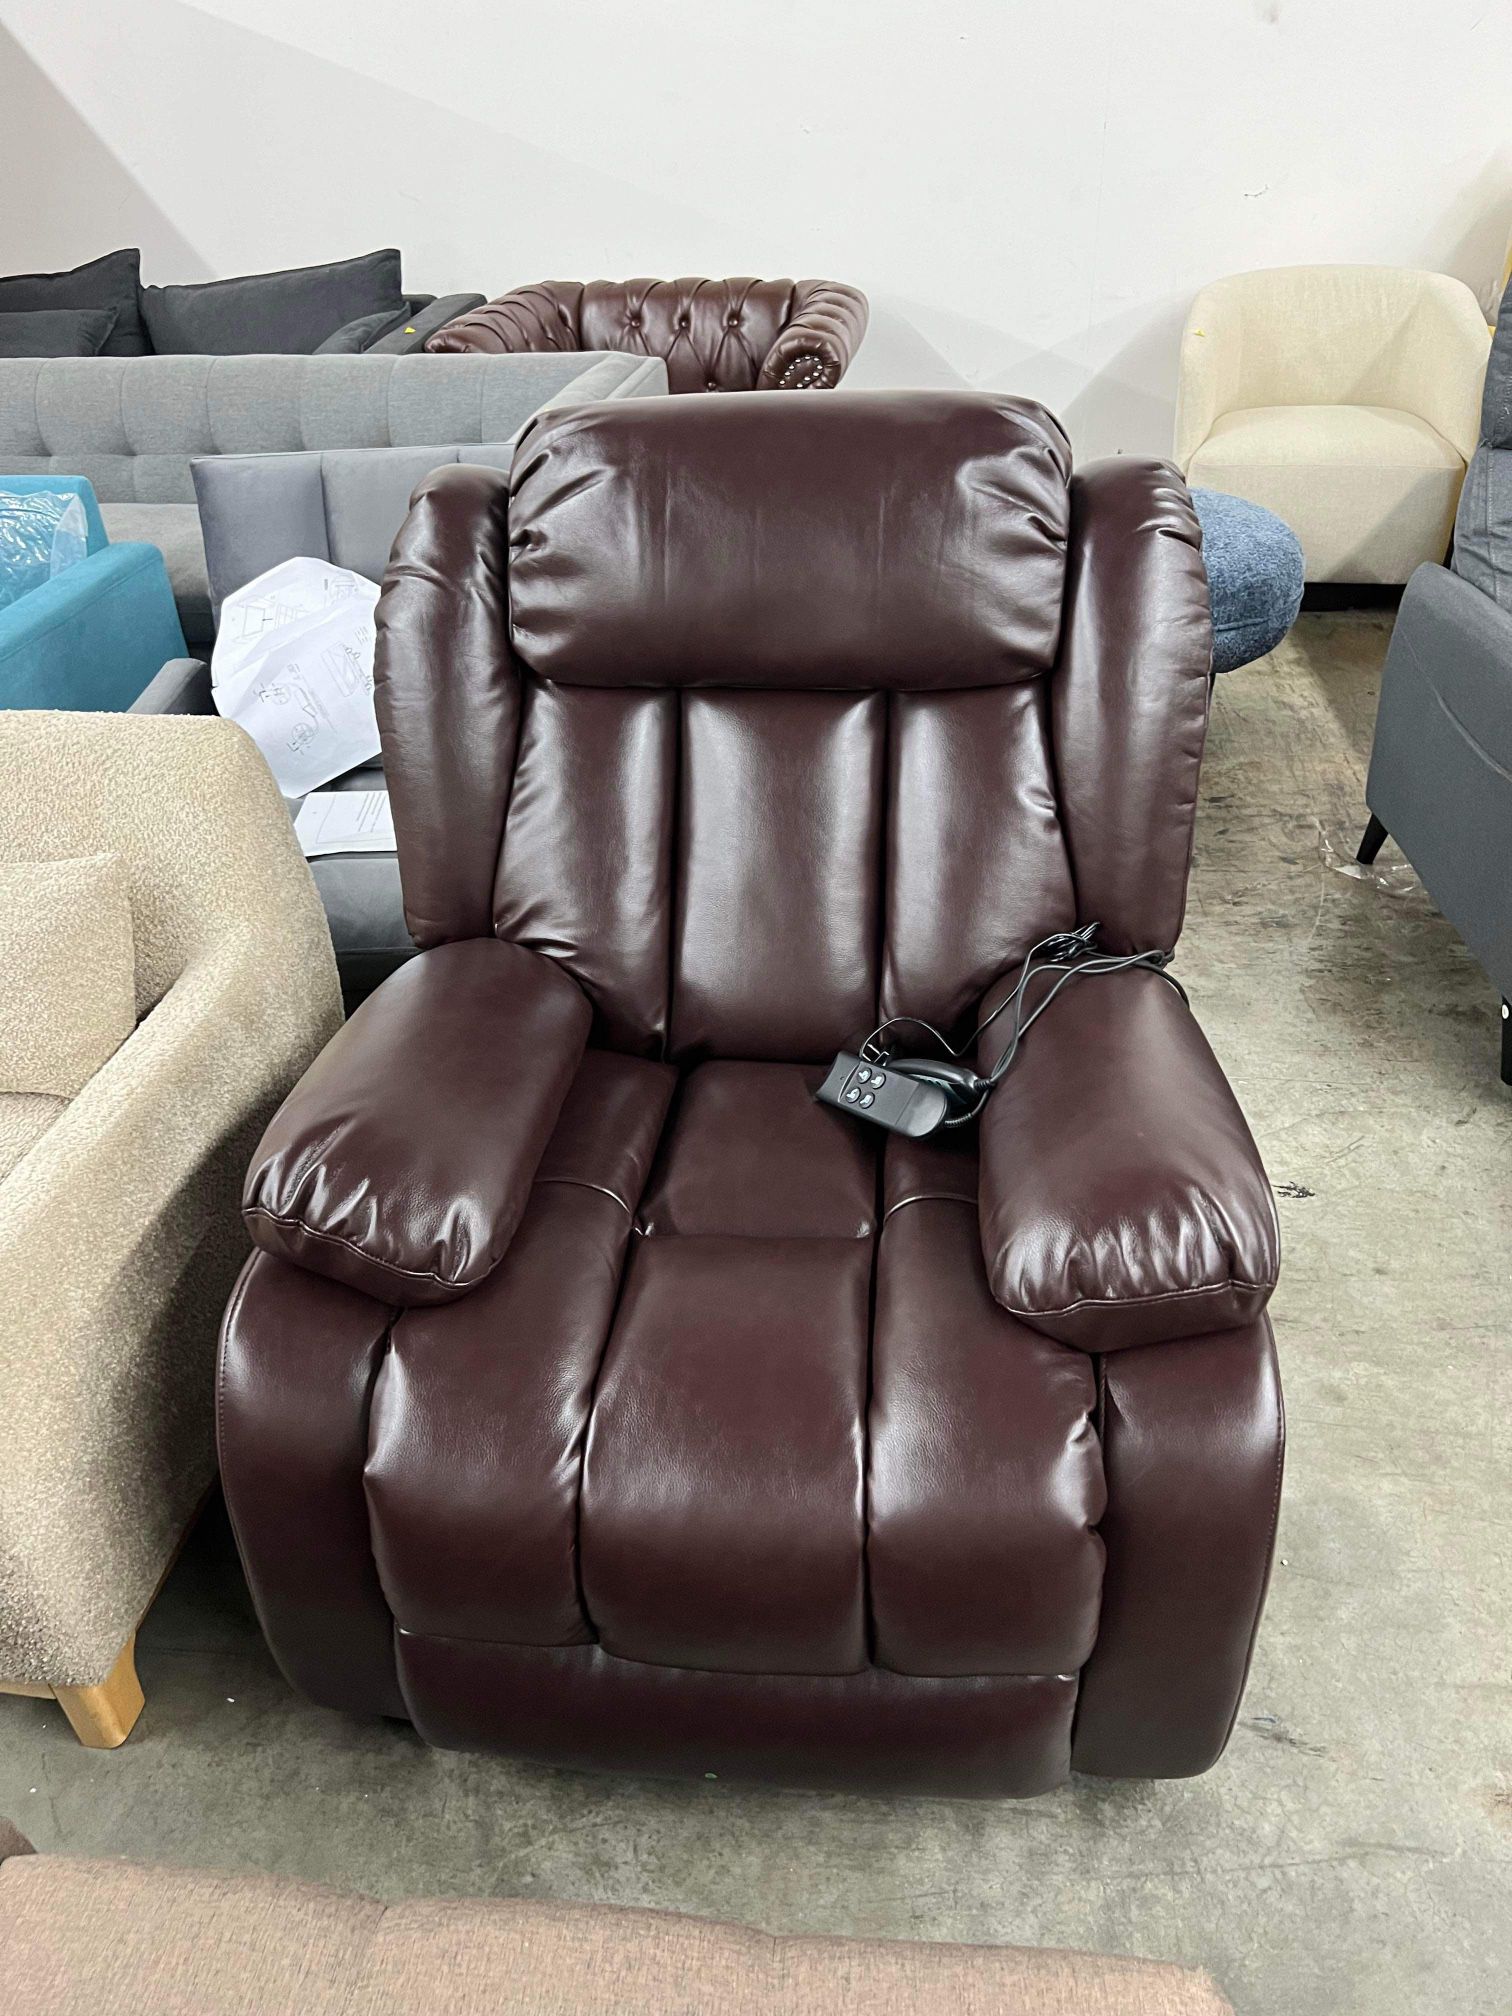 BALICHUN Lay Flat Sleeping Dual OKIN Motor Lift Chair Recliners for Elderly with Heat and Massage Up to 350 LBS,Breathable Leather with Breathable mic